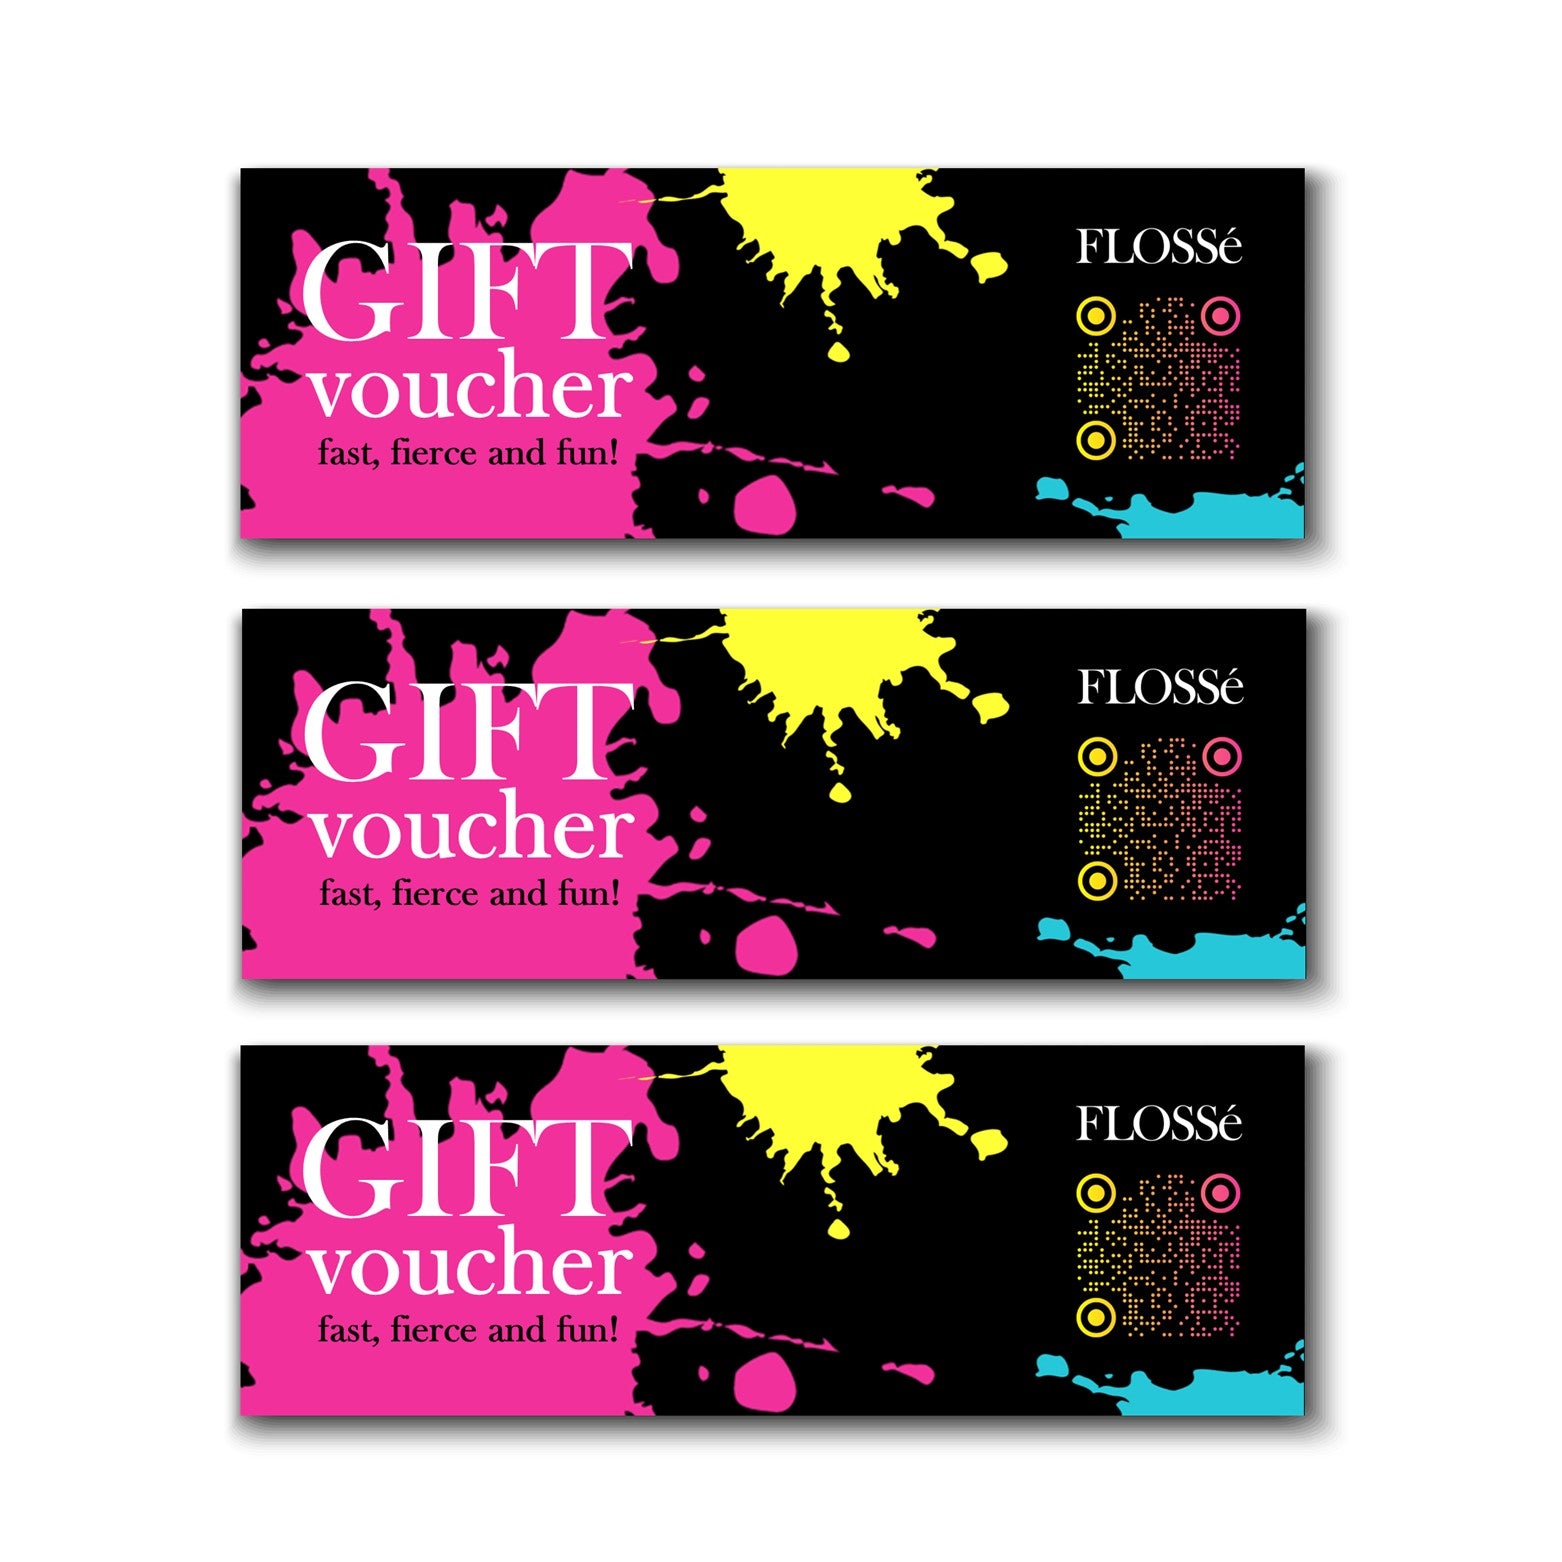 Row of 3 FLOSSe gift vouchers. Gift idea for girls. Mother's day gift idea. Christmas gift idea.